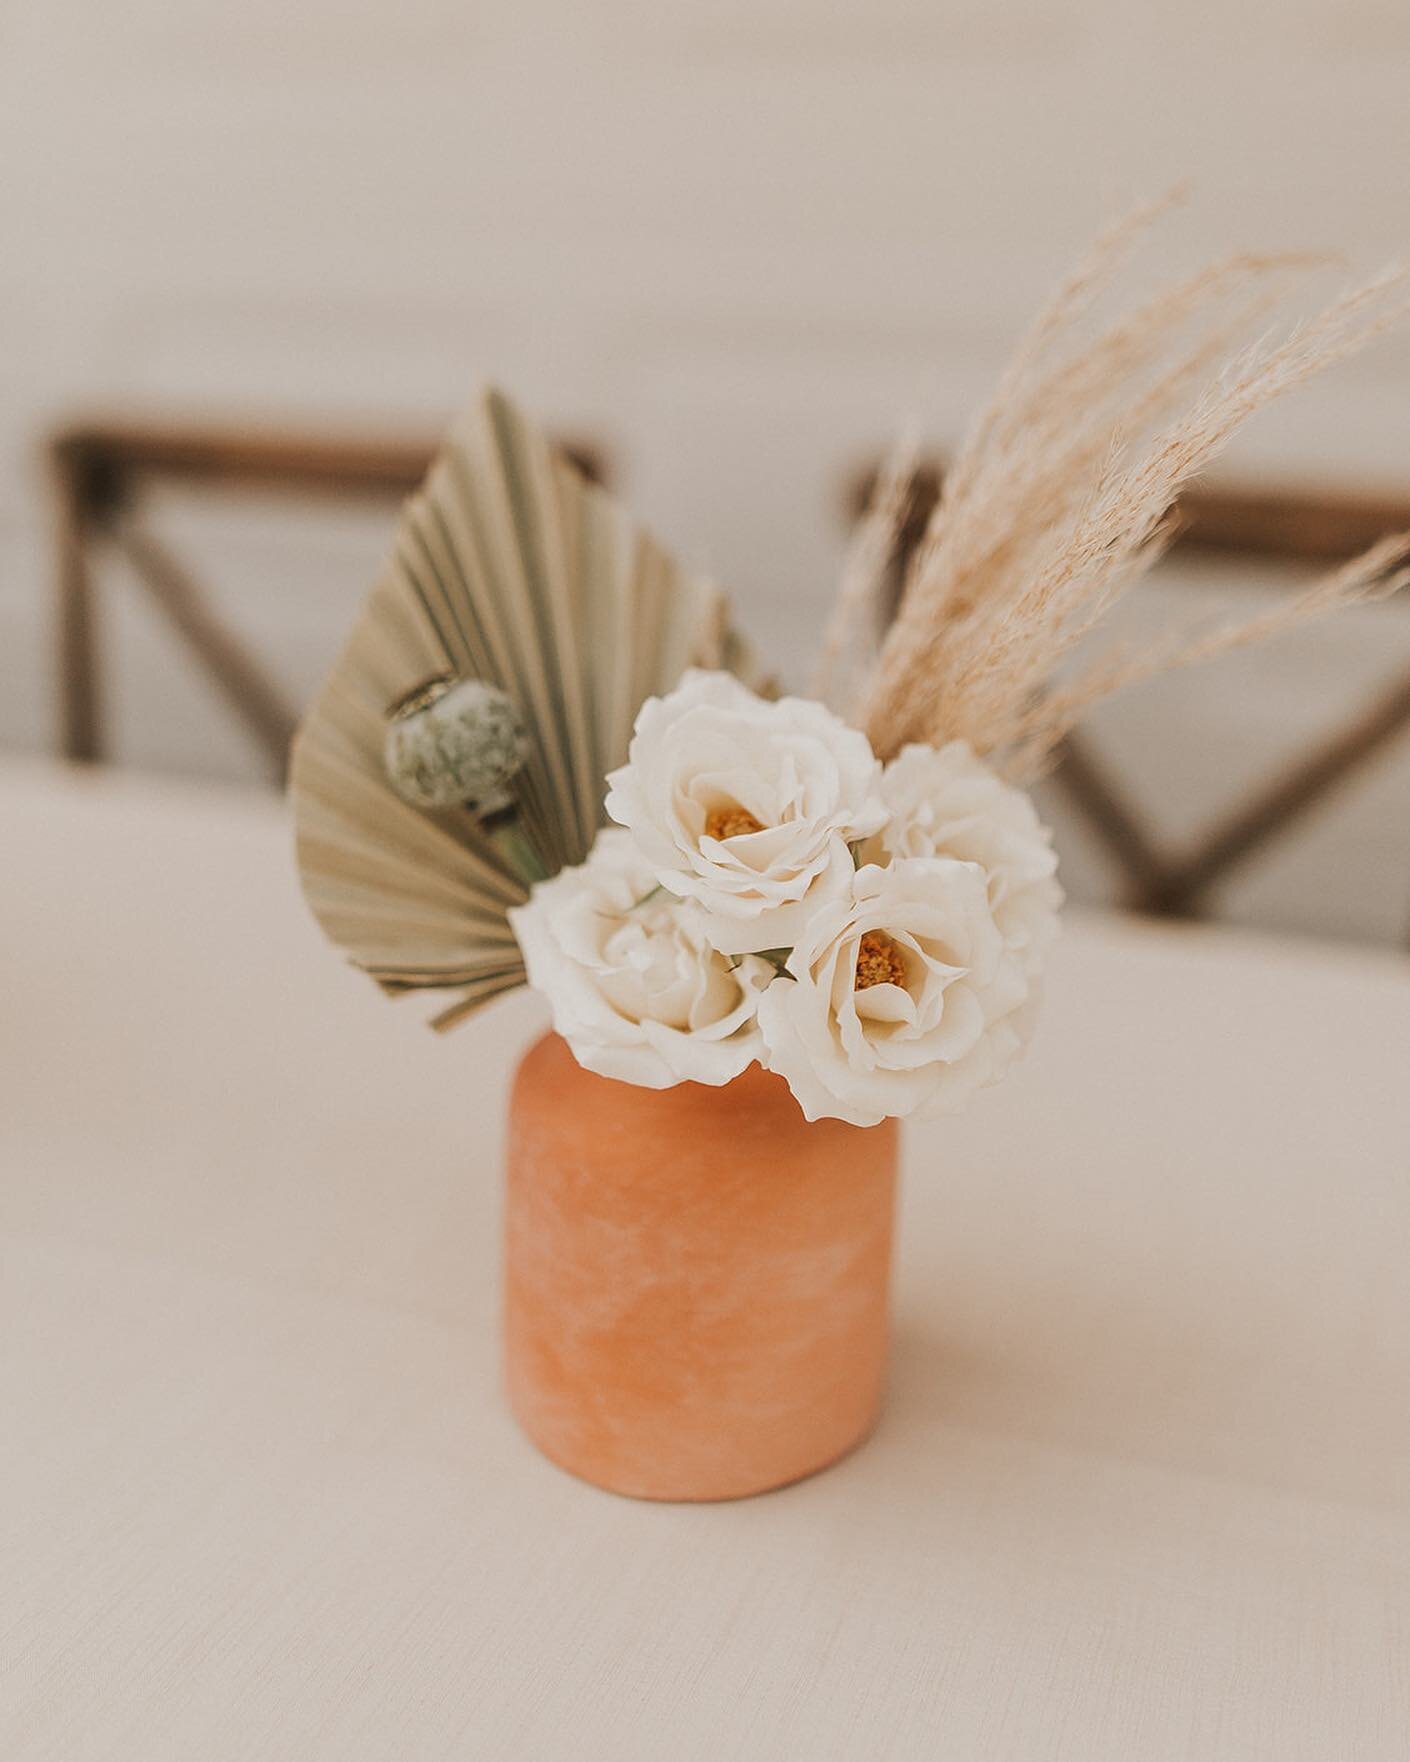 Preserved palm, pampas grass, &amp; terracotta vases are my jam right now 🥰